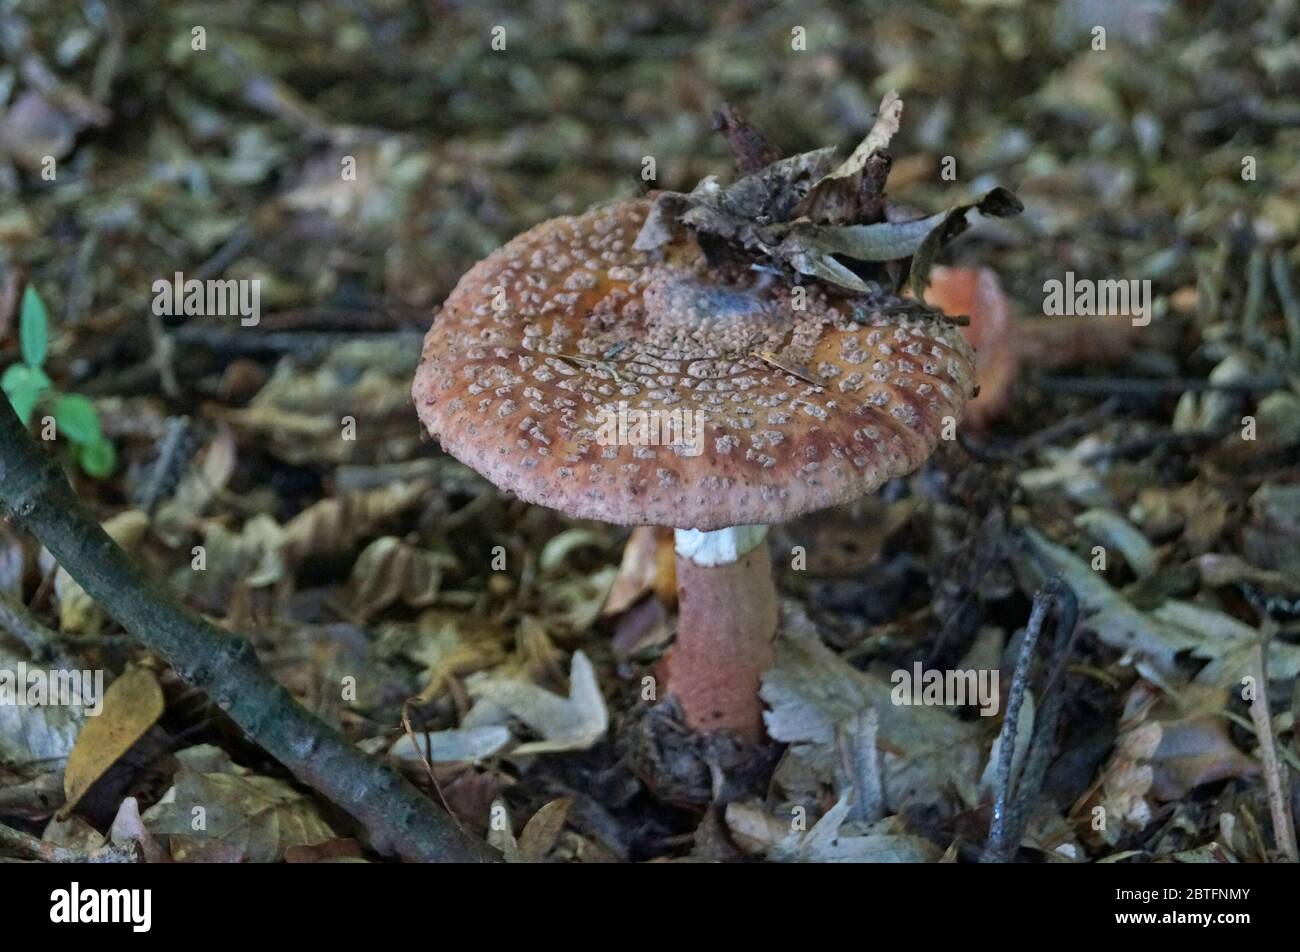 Amanita mushroom with a brown hat in a white dot and a white leg grows in the grass in the forest Stock Photo